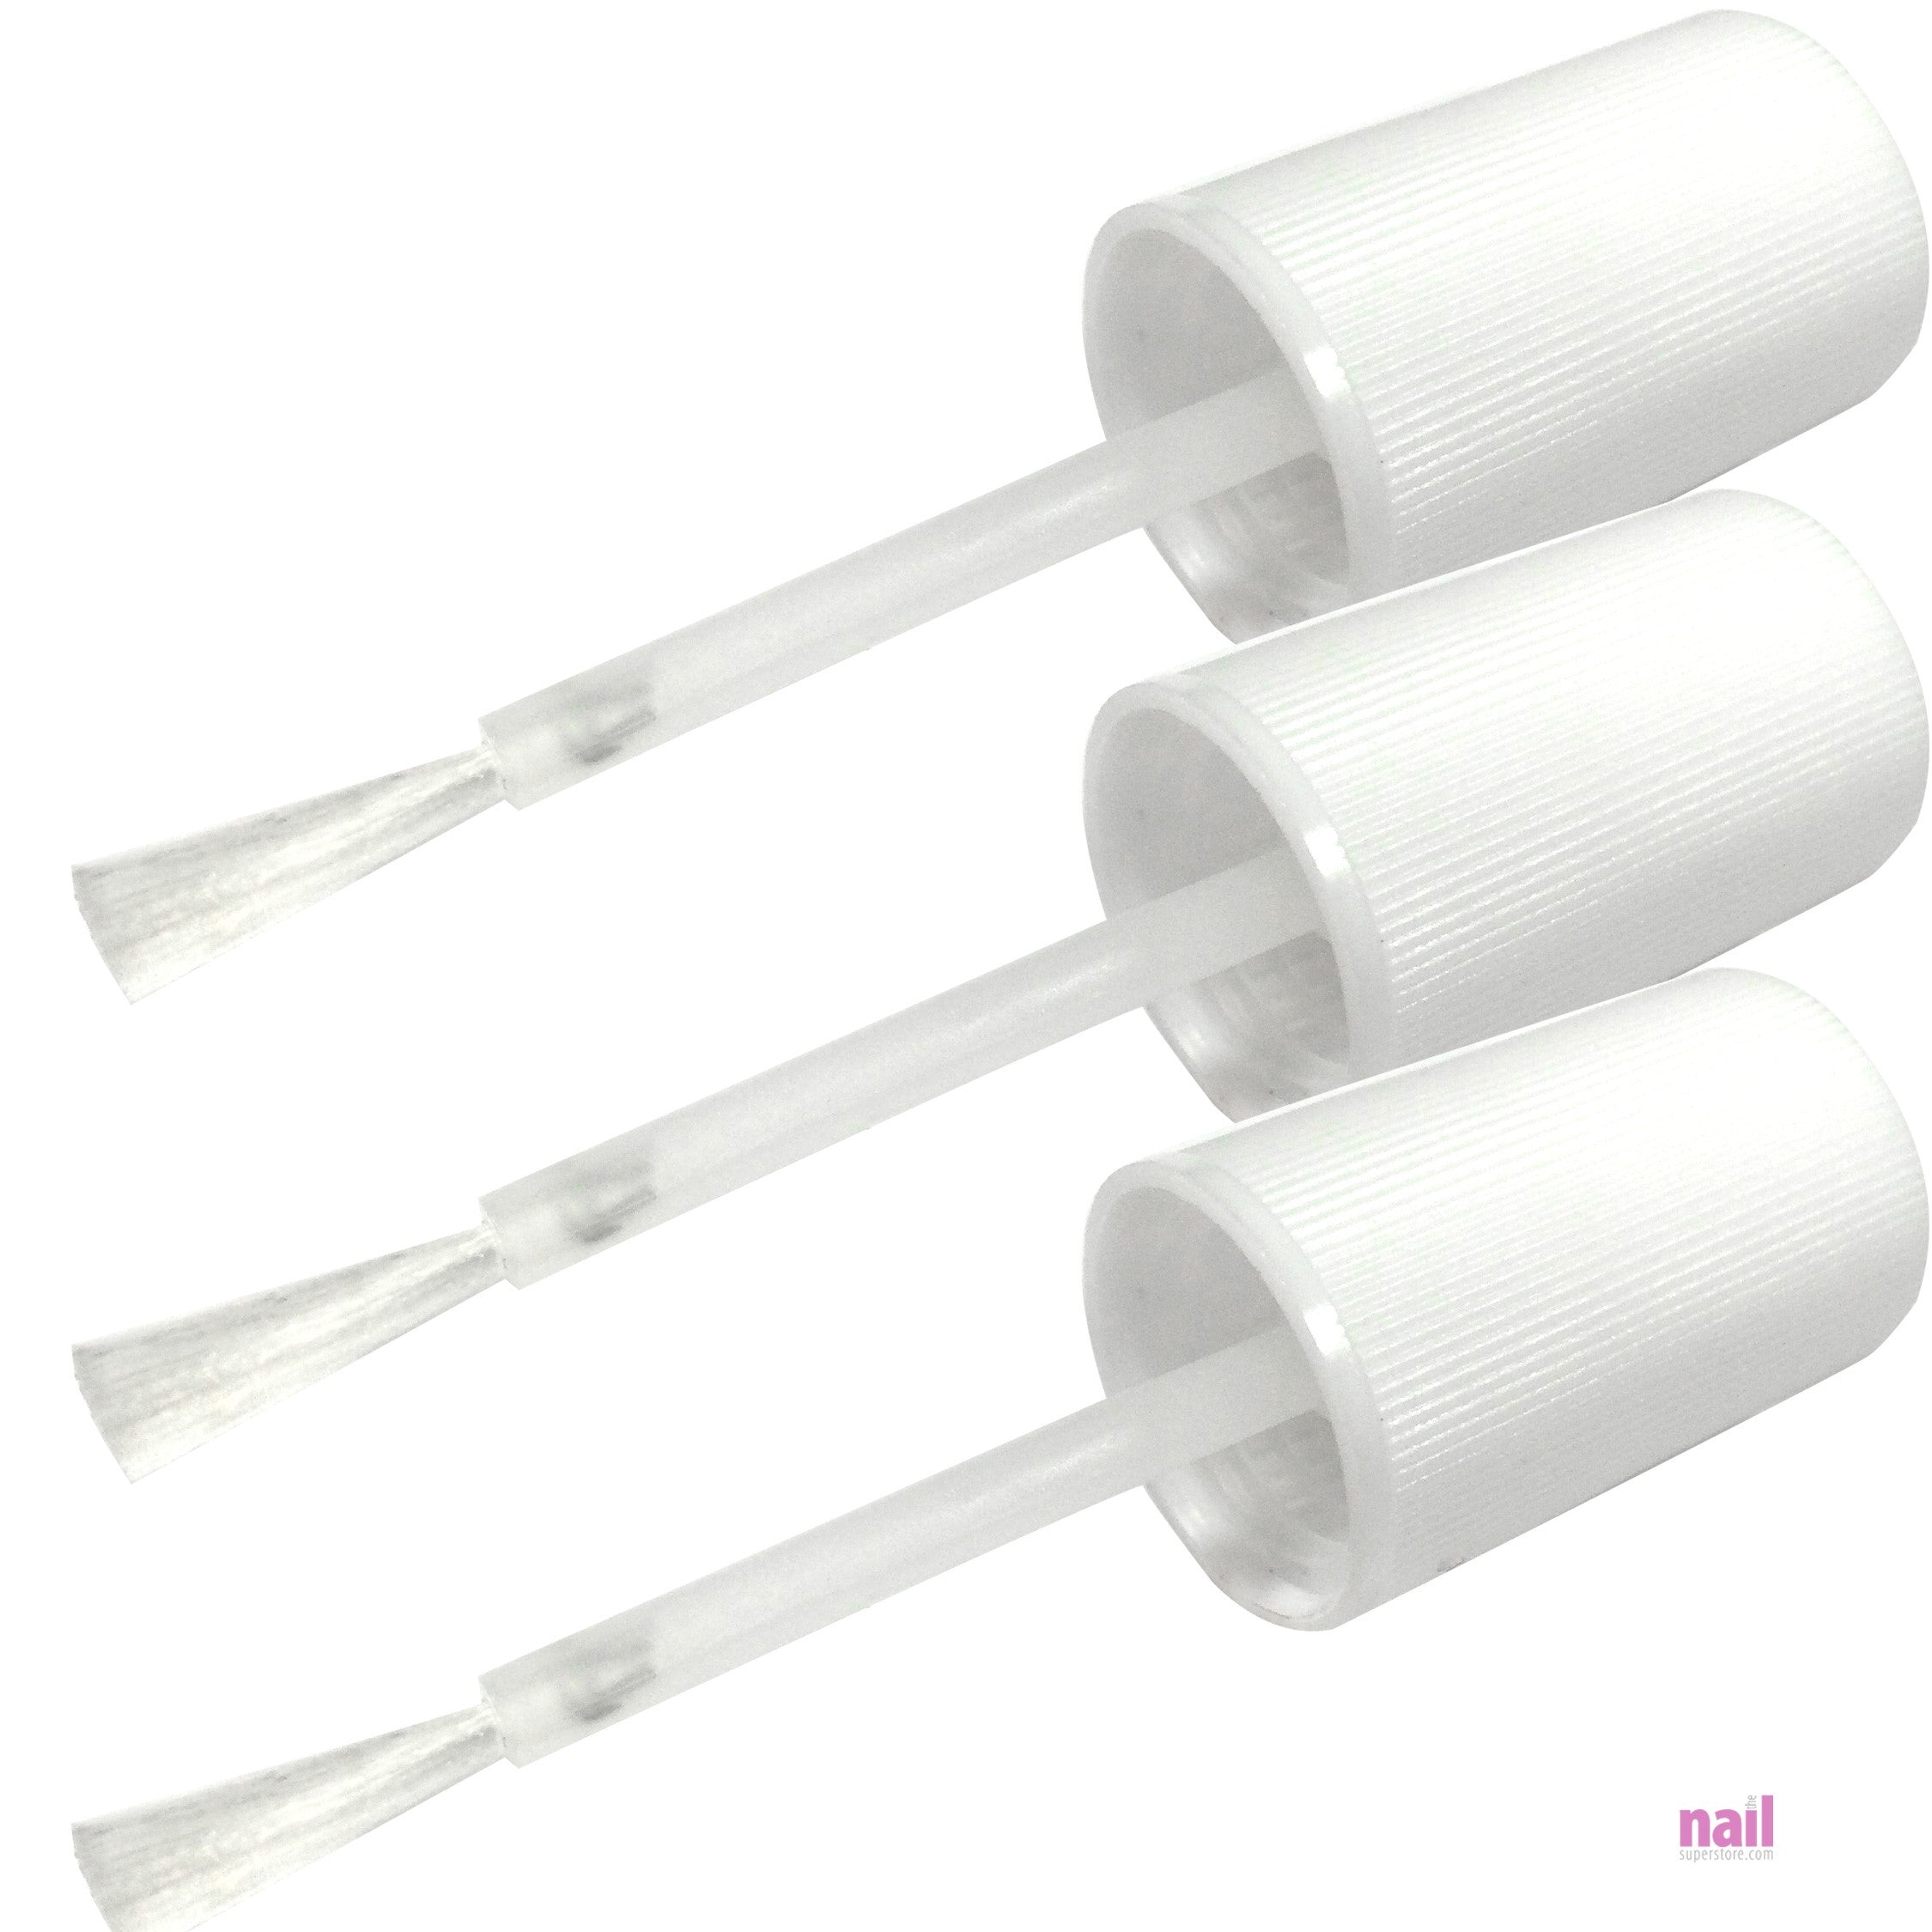 Artisan EZ Dipper Replacement Cap with Nail Brush 5 pcs | Fits Top & Base Resin – Step #2 & #4 Bottle - Pack